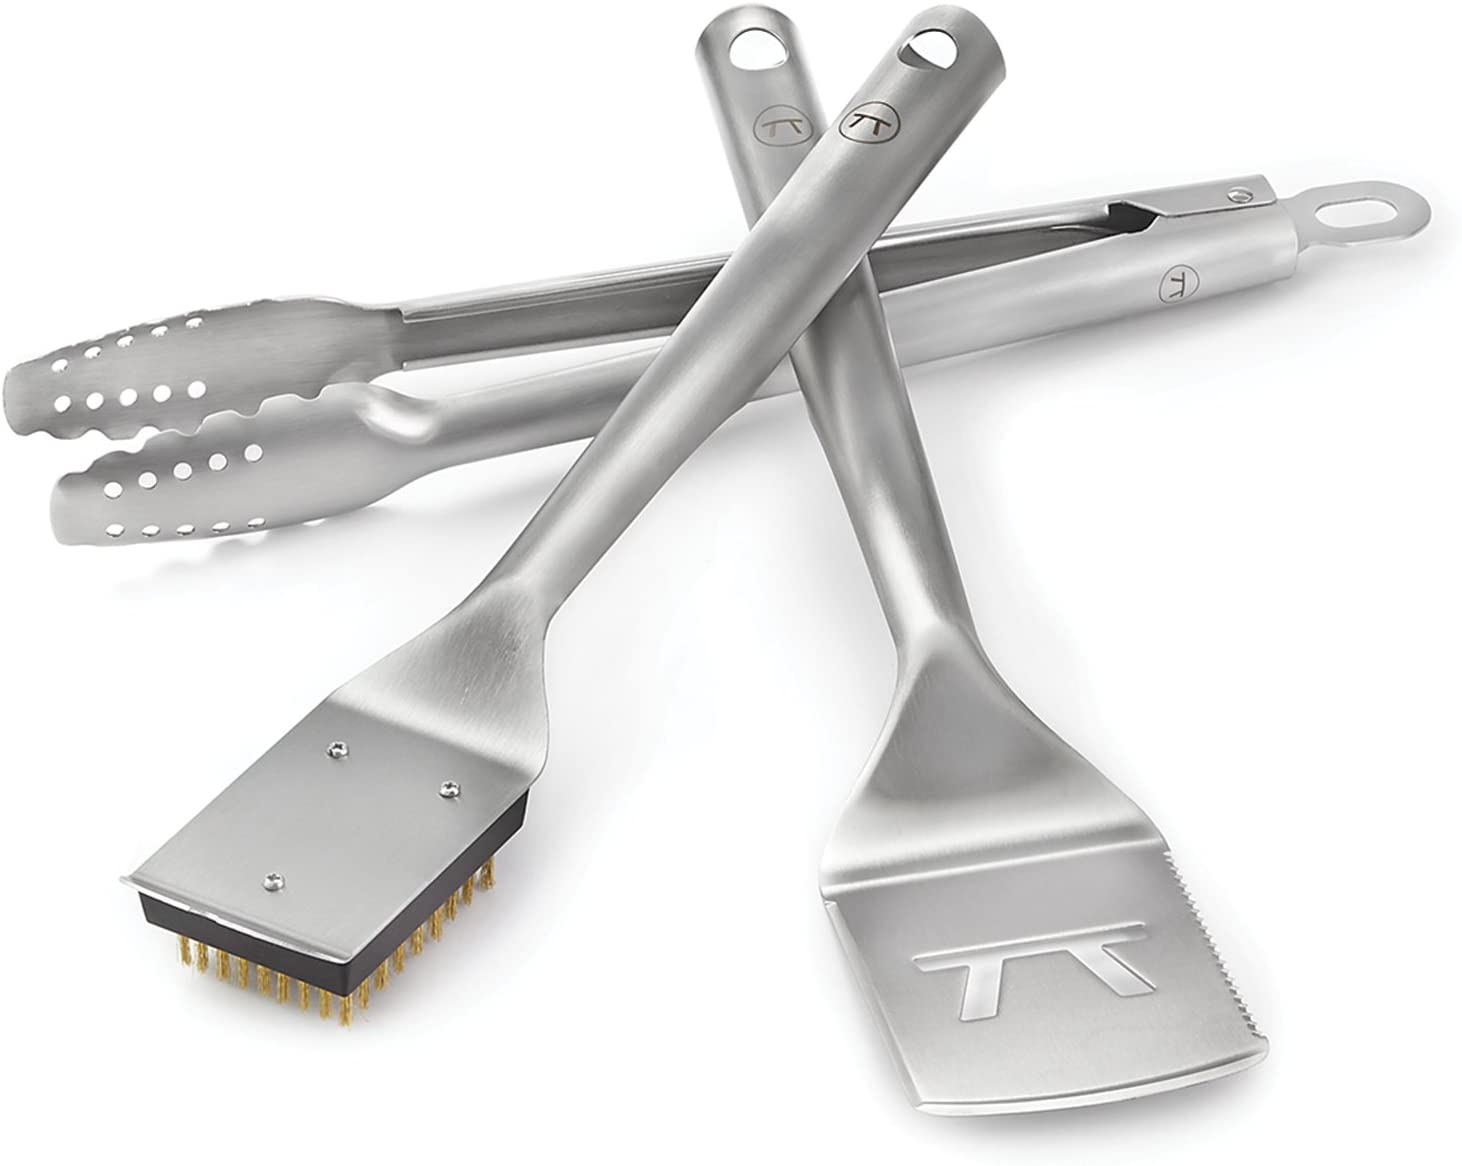 Outset 76357 Lux Collection Grill Tool Set, 3-Piece